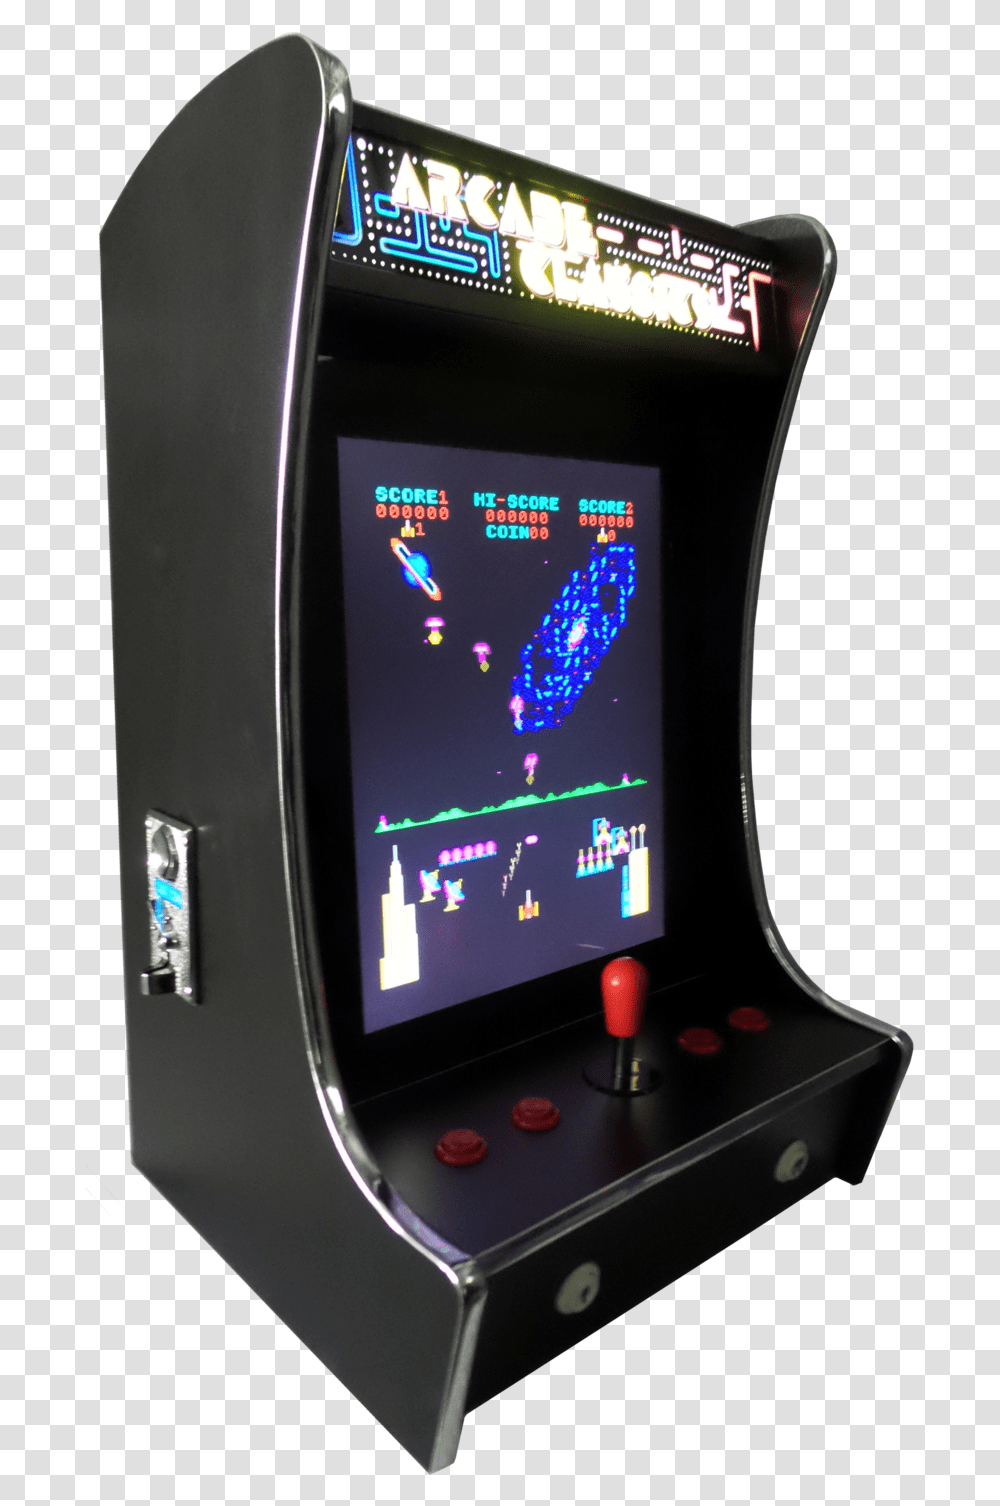 Download Bartop Arcade Machine Arcade Game, Mobile Phone, Electronics, Cell Phone, Arcade Game Machine Transparent Png